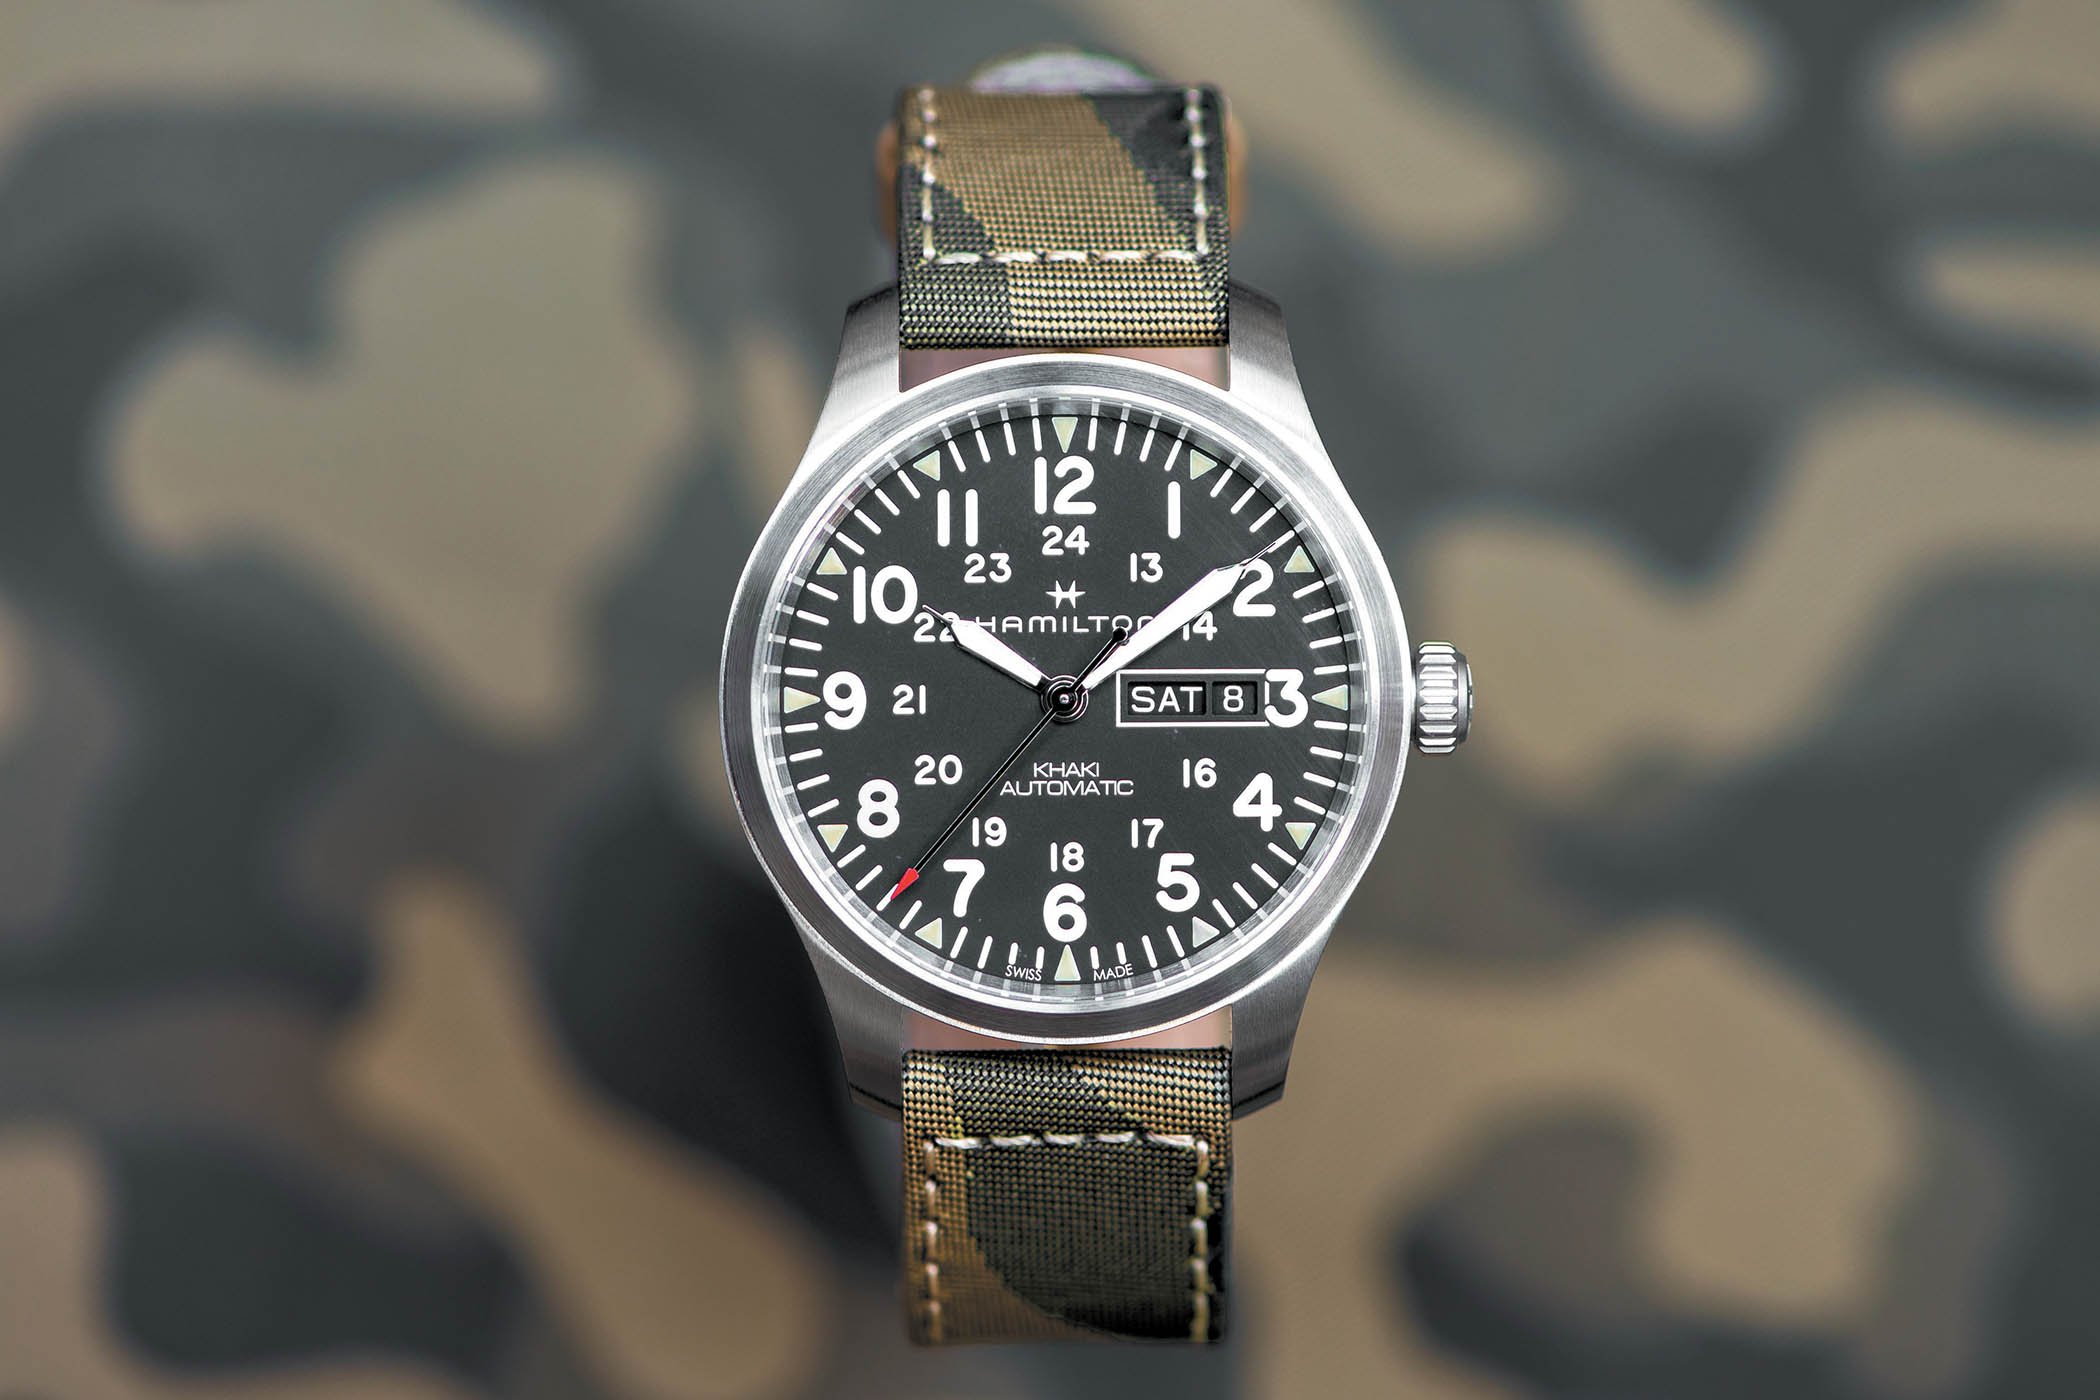 Introducing - Hamilton Khaki Field Day-Date 42mm “Camouflage